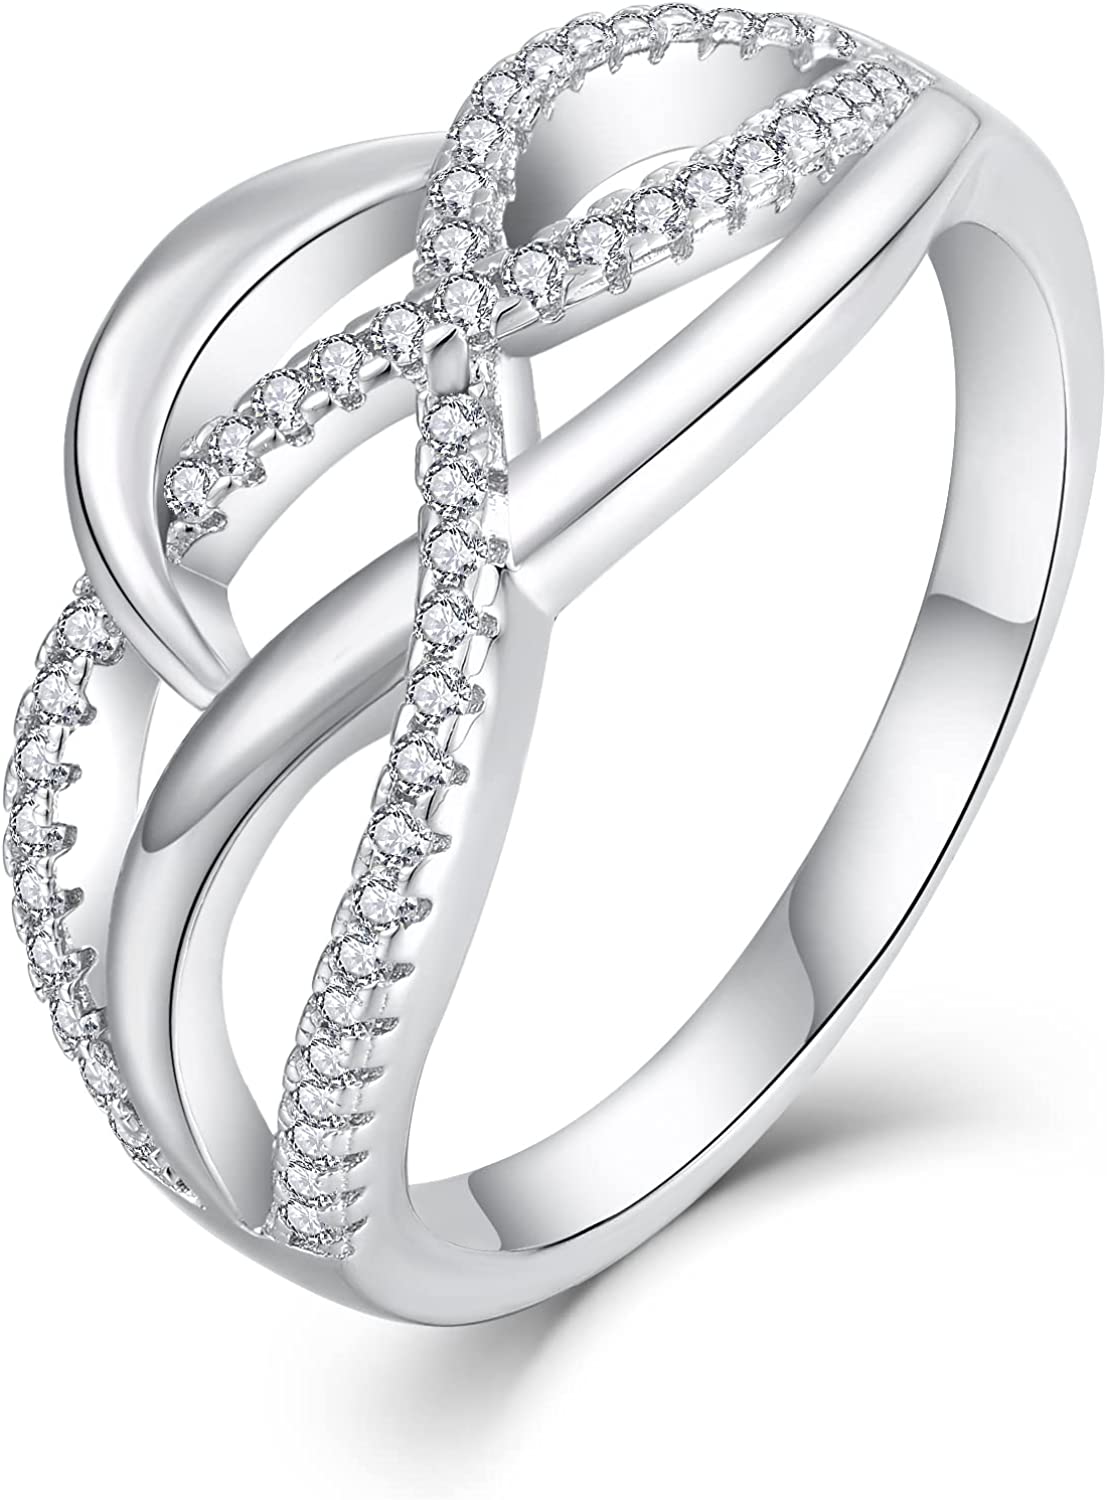 Starchenie Infinity Ring for Women 925 Sterling Silver Twisted Knot Ring Size 5-10